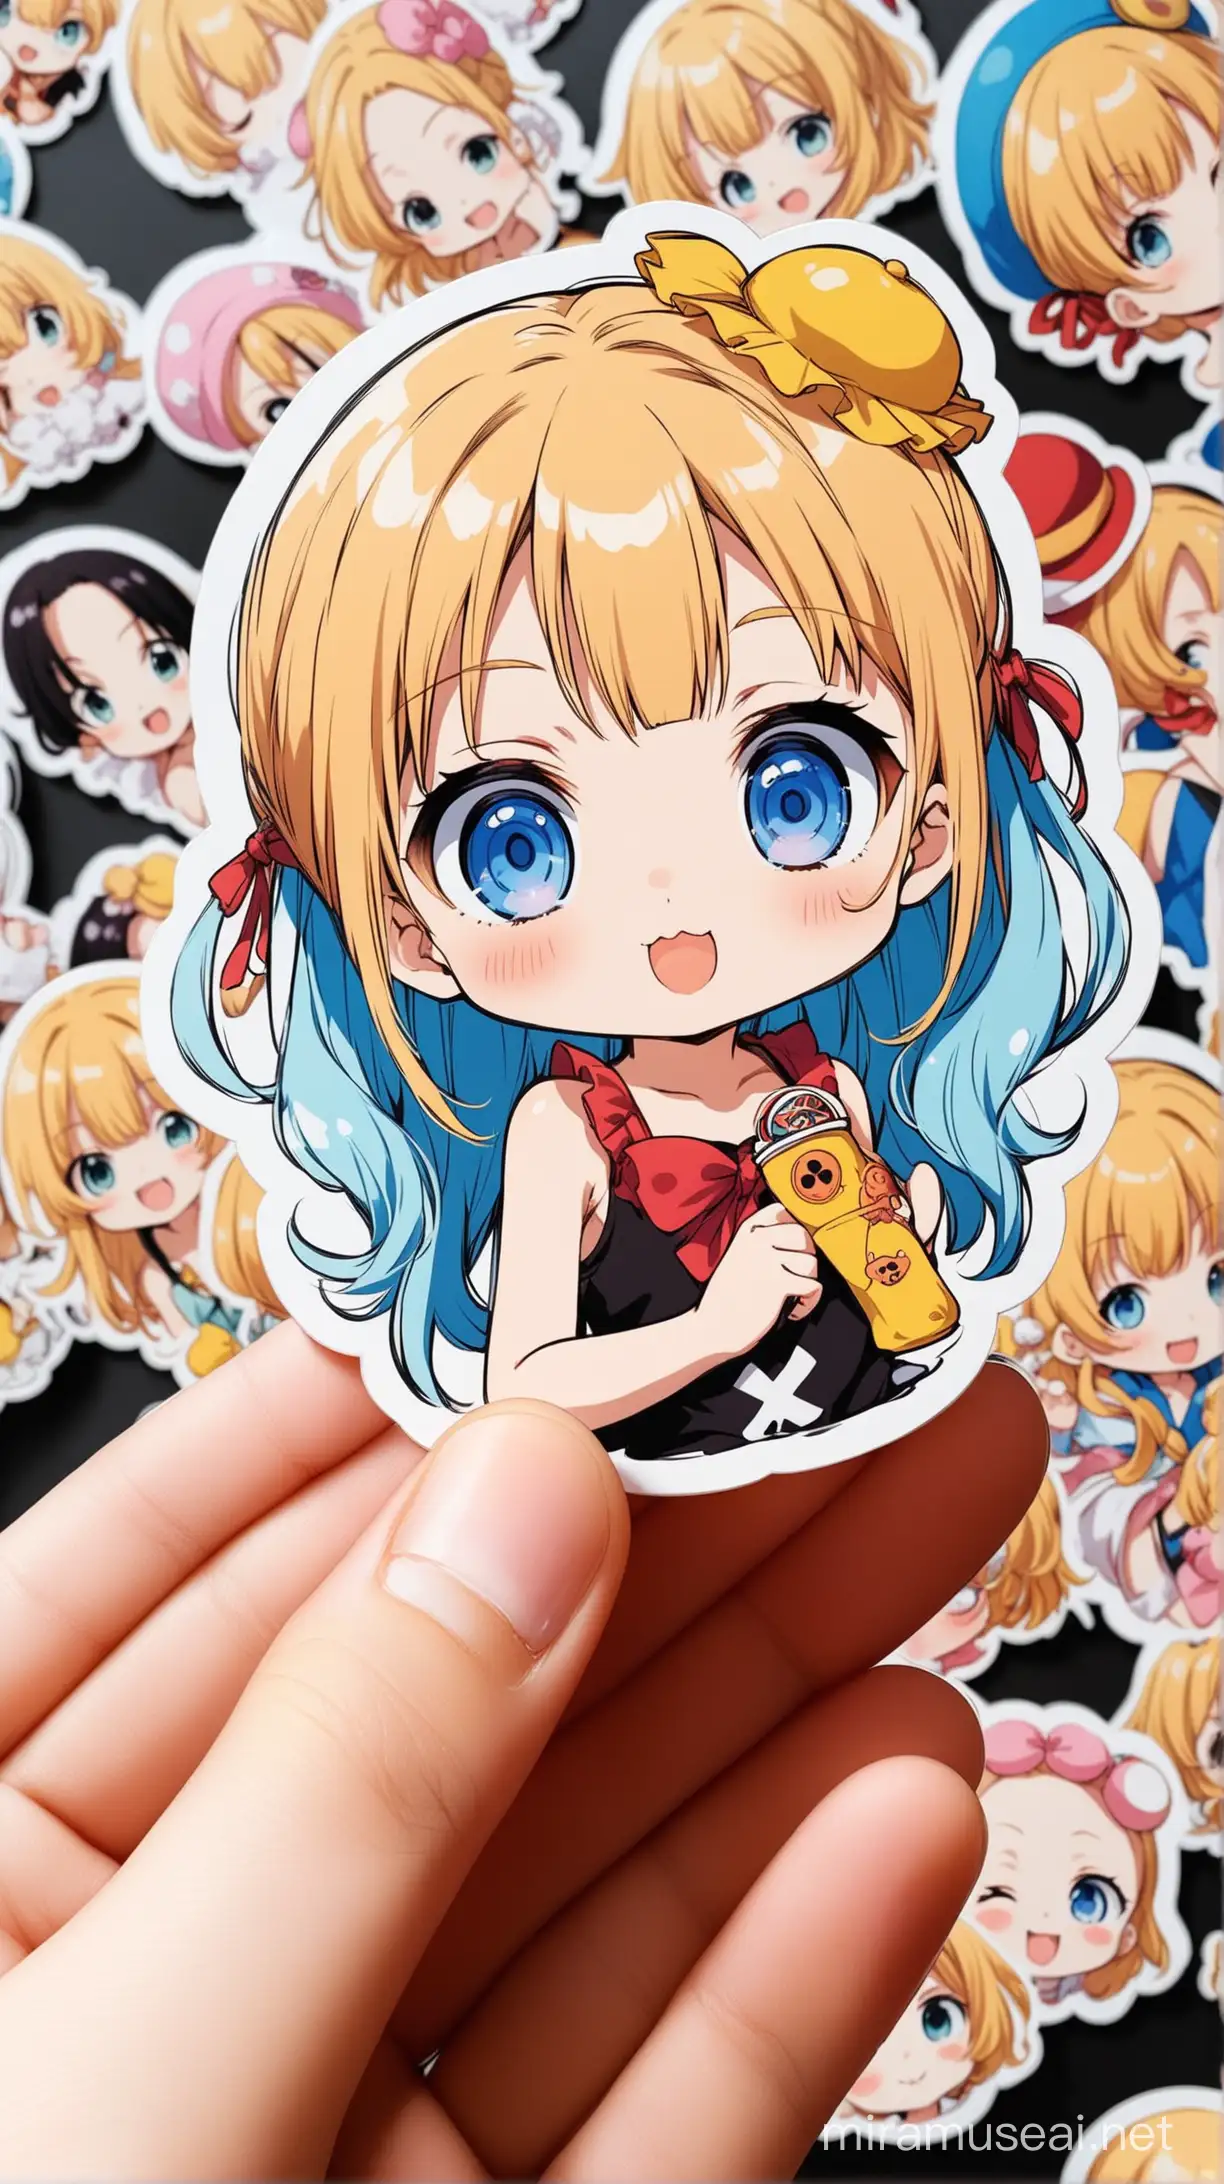 AnimeInspired Adorable Girl in One Piece Themed Sticker Design